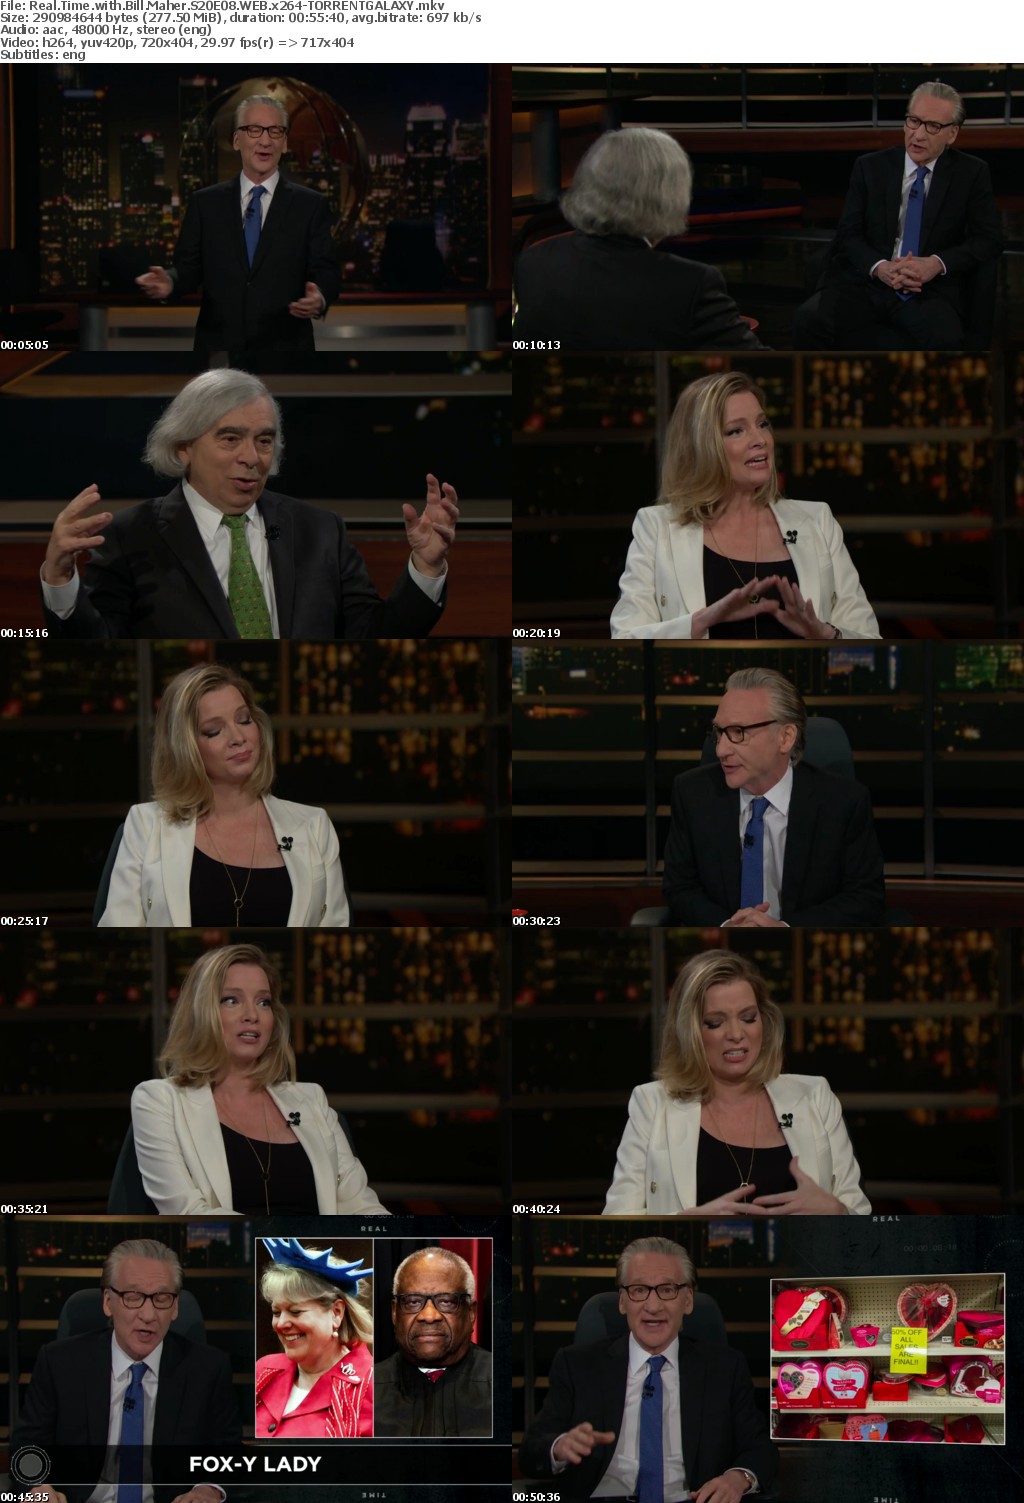 Real Time with Bill Maher S20E08 WEB x264-GALAXY